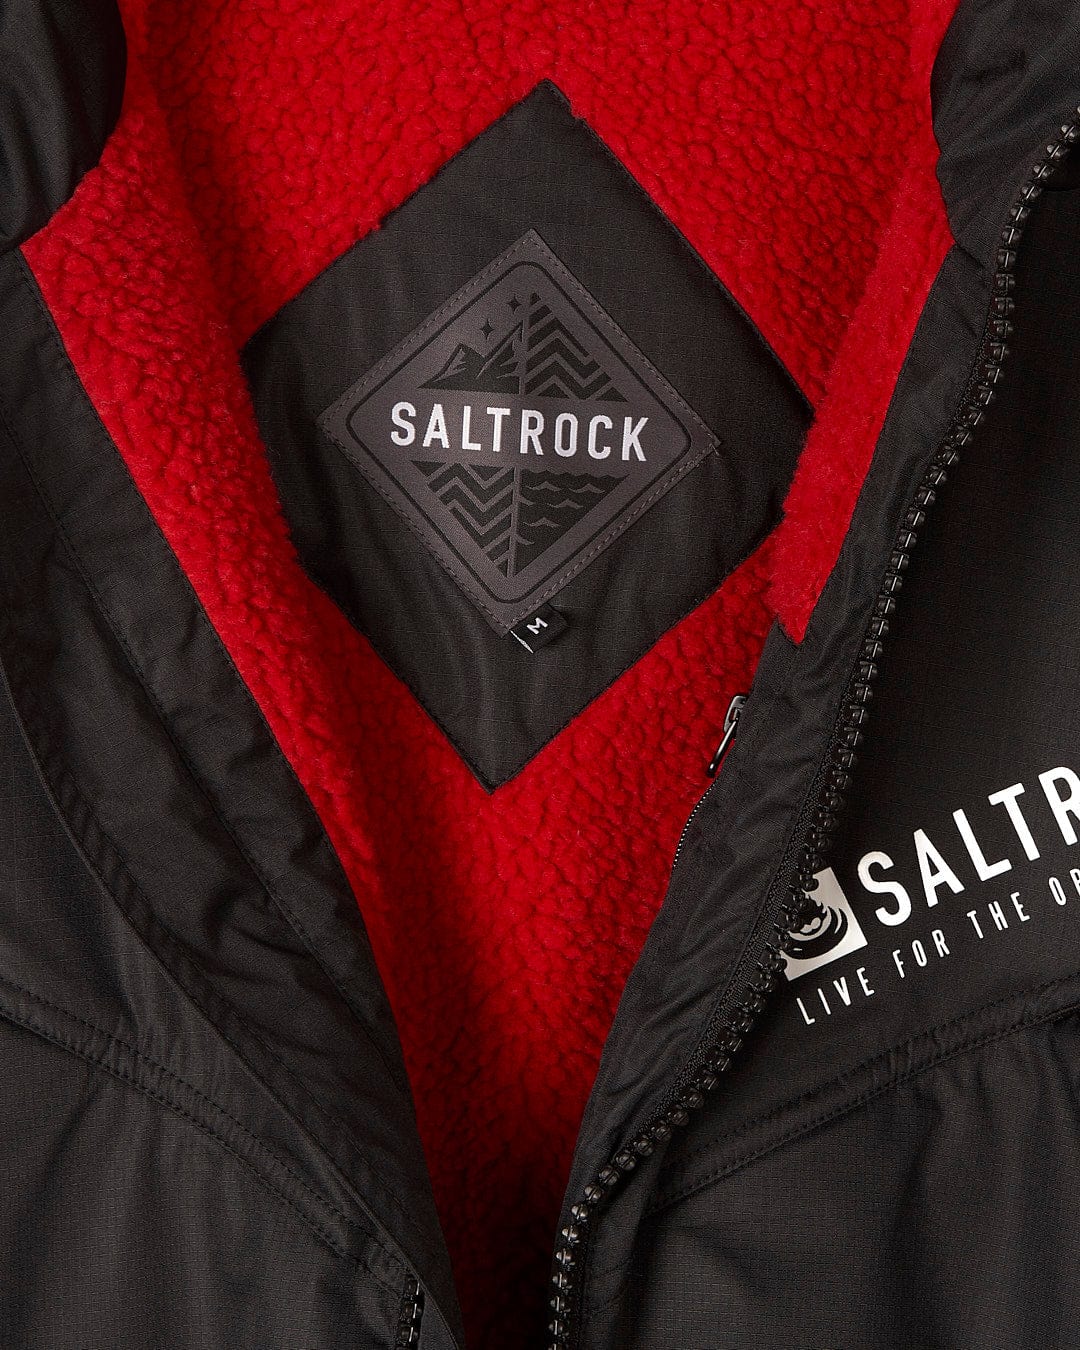 A Four Seasons - Waterproof Changing Robe - Black/Red with the Saltrock logo on it.